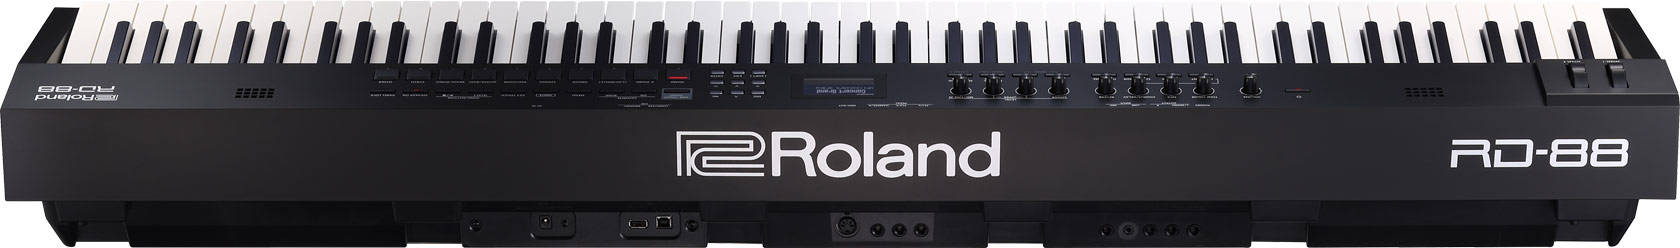 Roland - RD-88 | Stage Piano